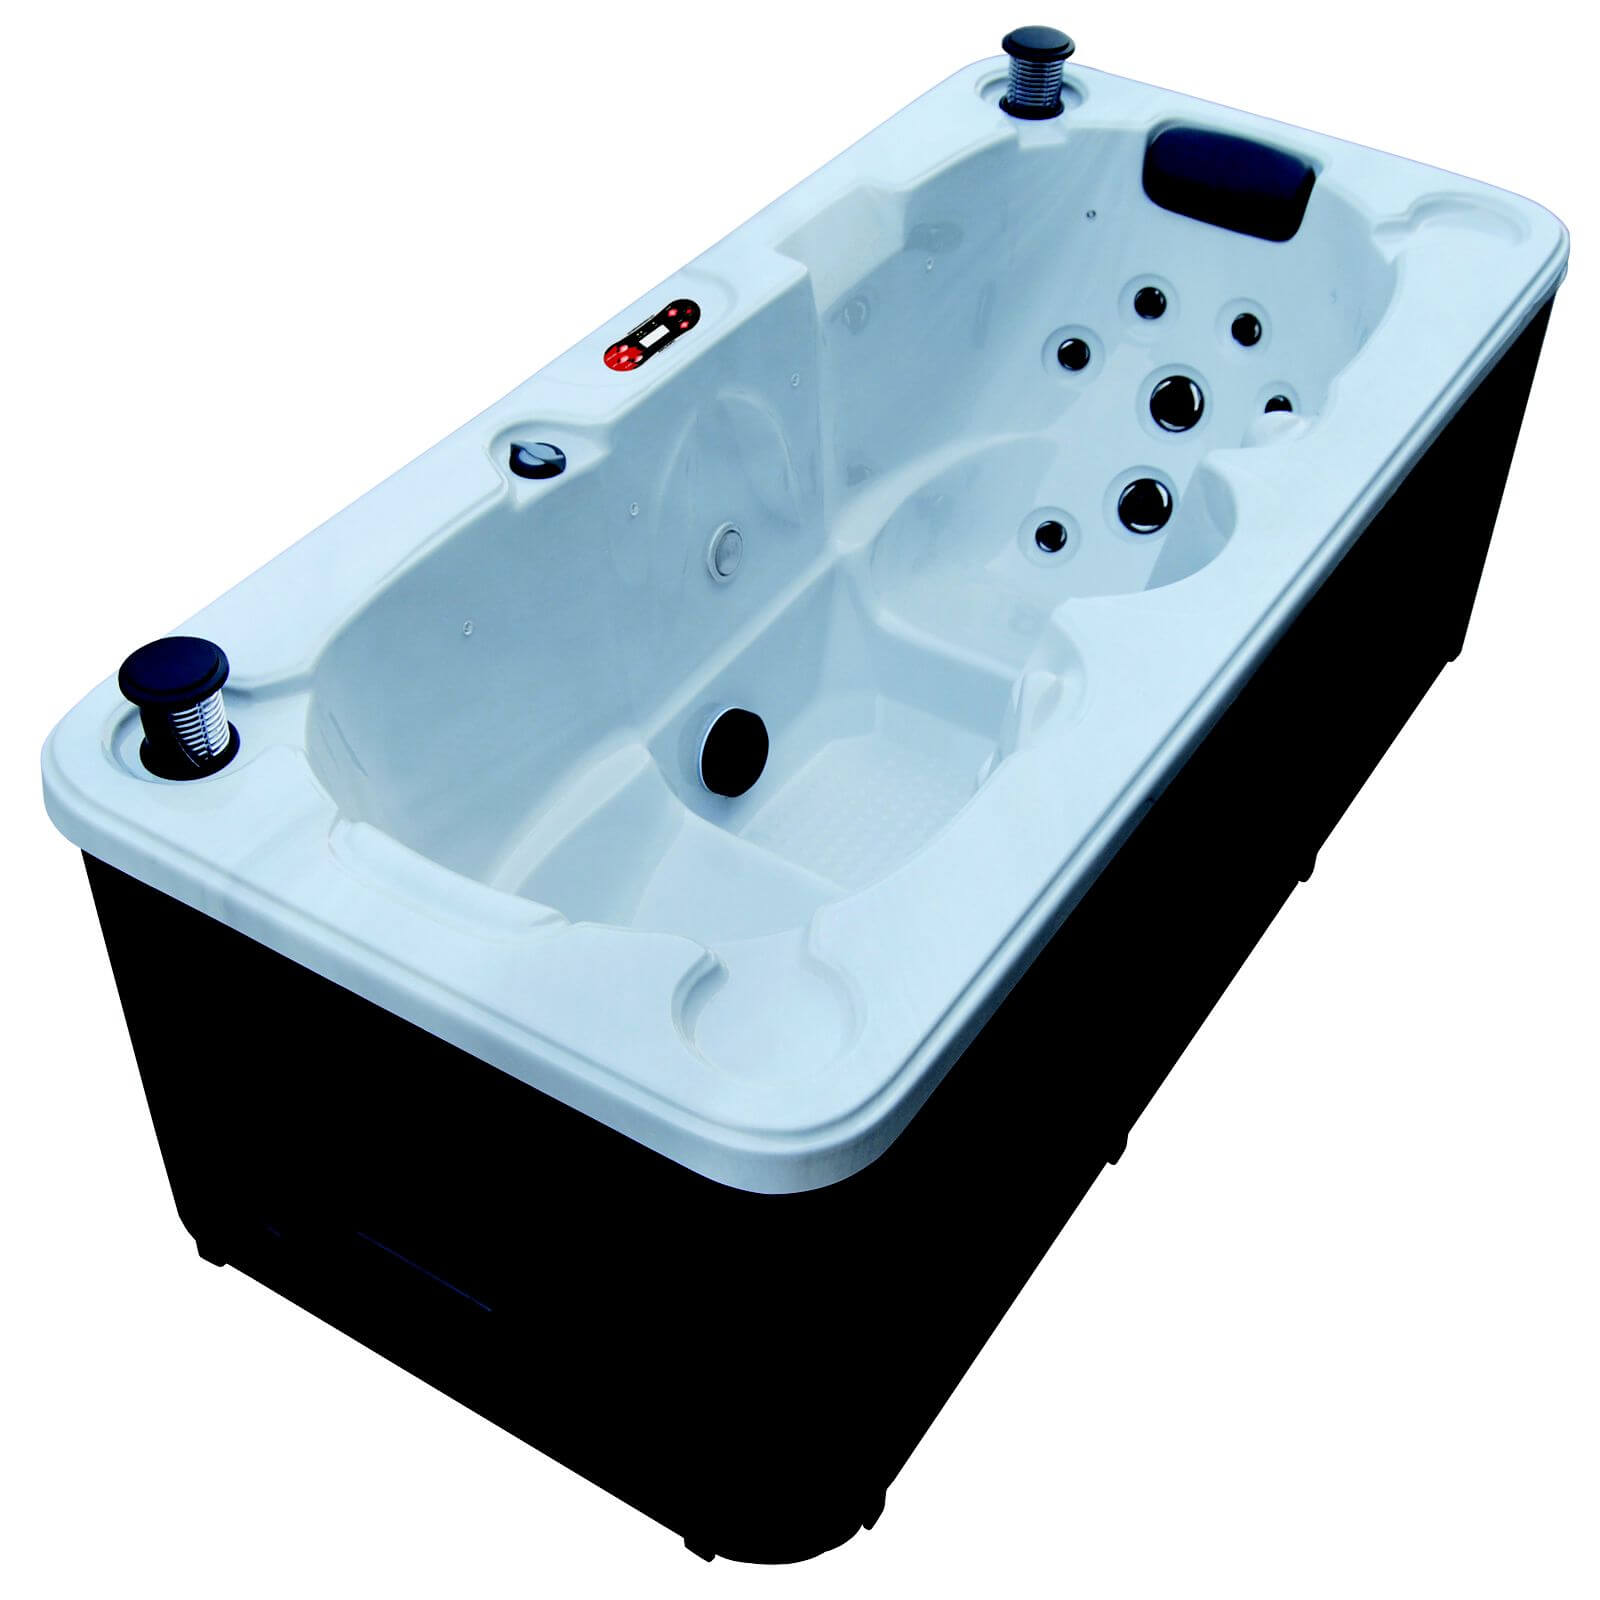 Canadian Spa Yukon 2 Person Hot Tub (Includes Free Delivery & Installation)